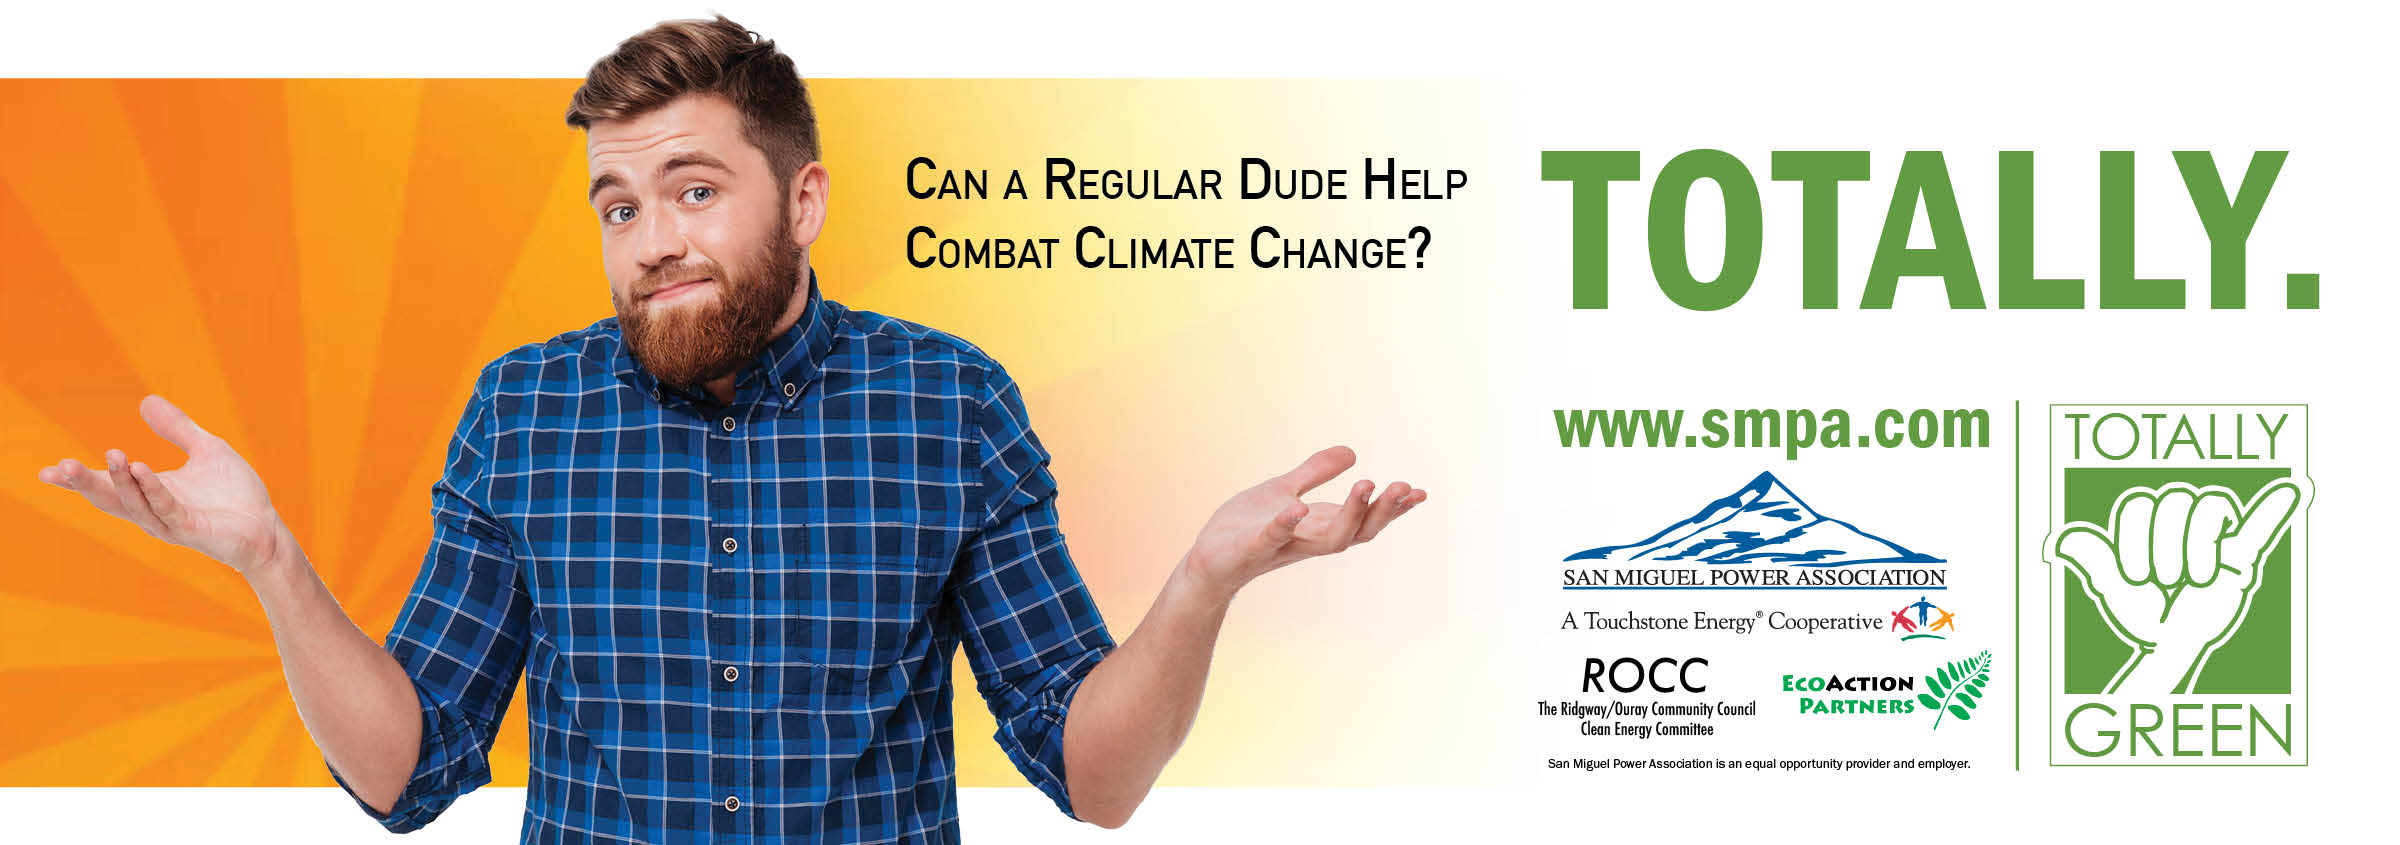 Can a regular dude help combat climate change?  TOTALLY!